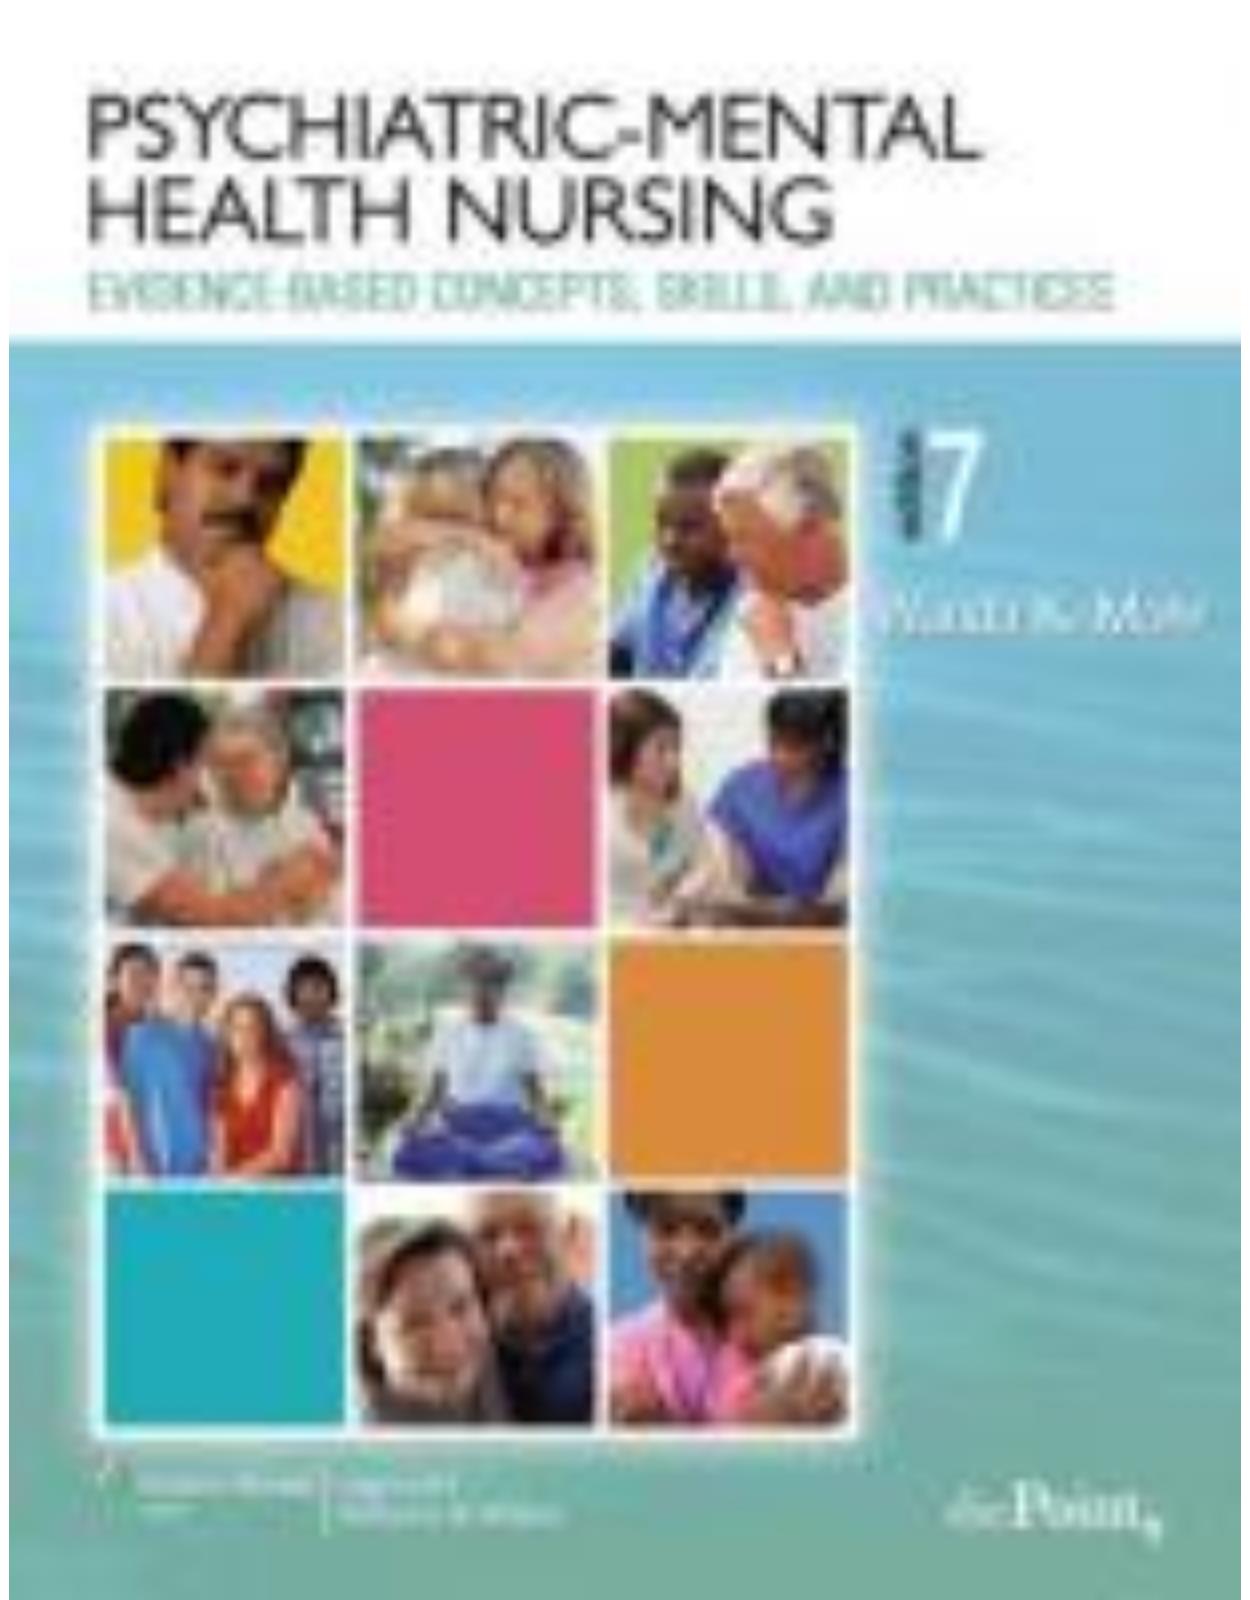 Psychiatric-mental Health Nursing: Evidence-based Concepts, Skills and Practices